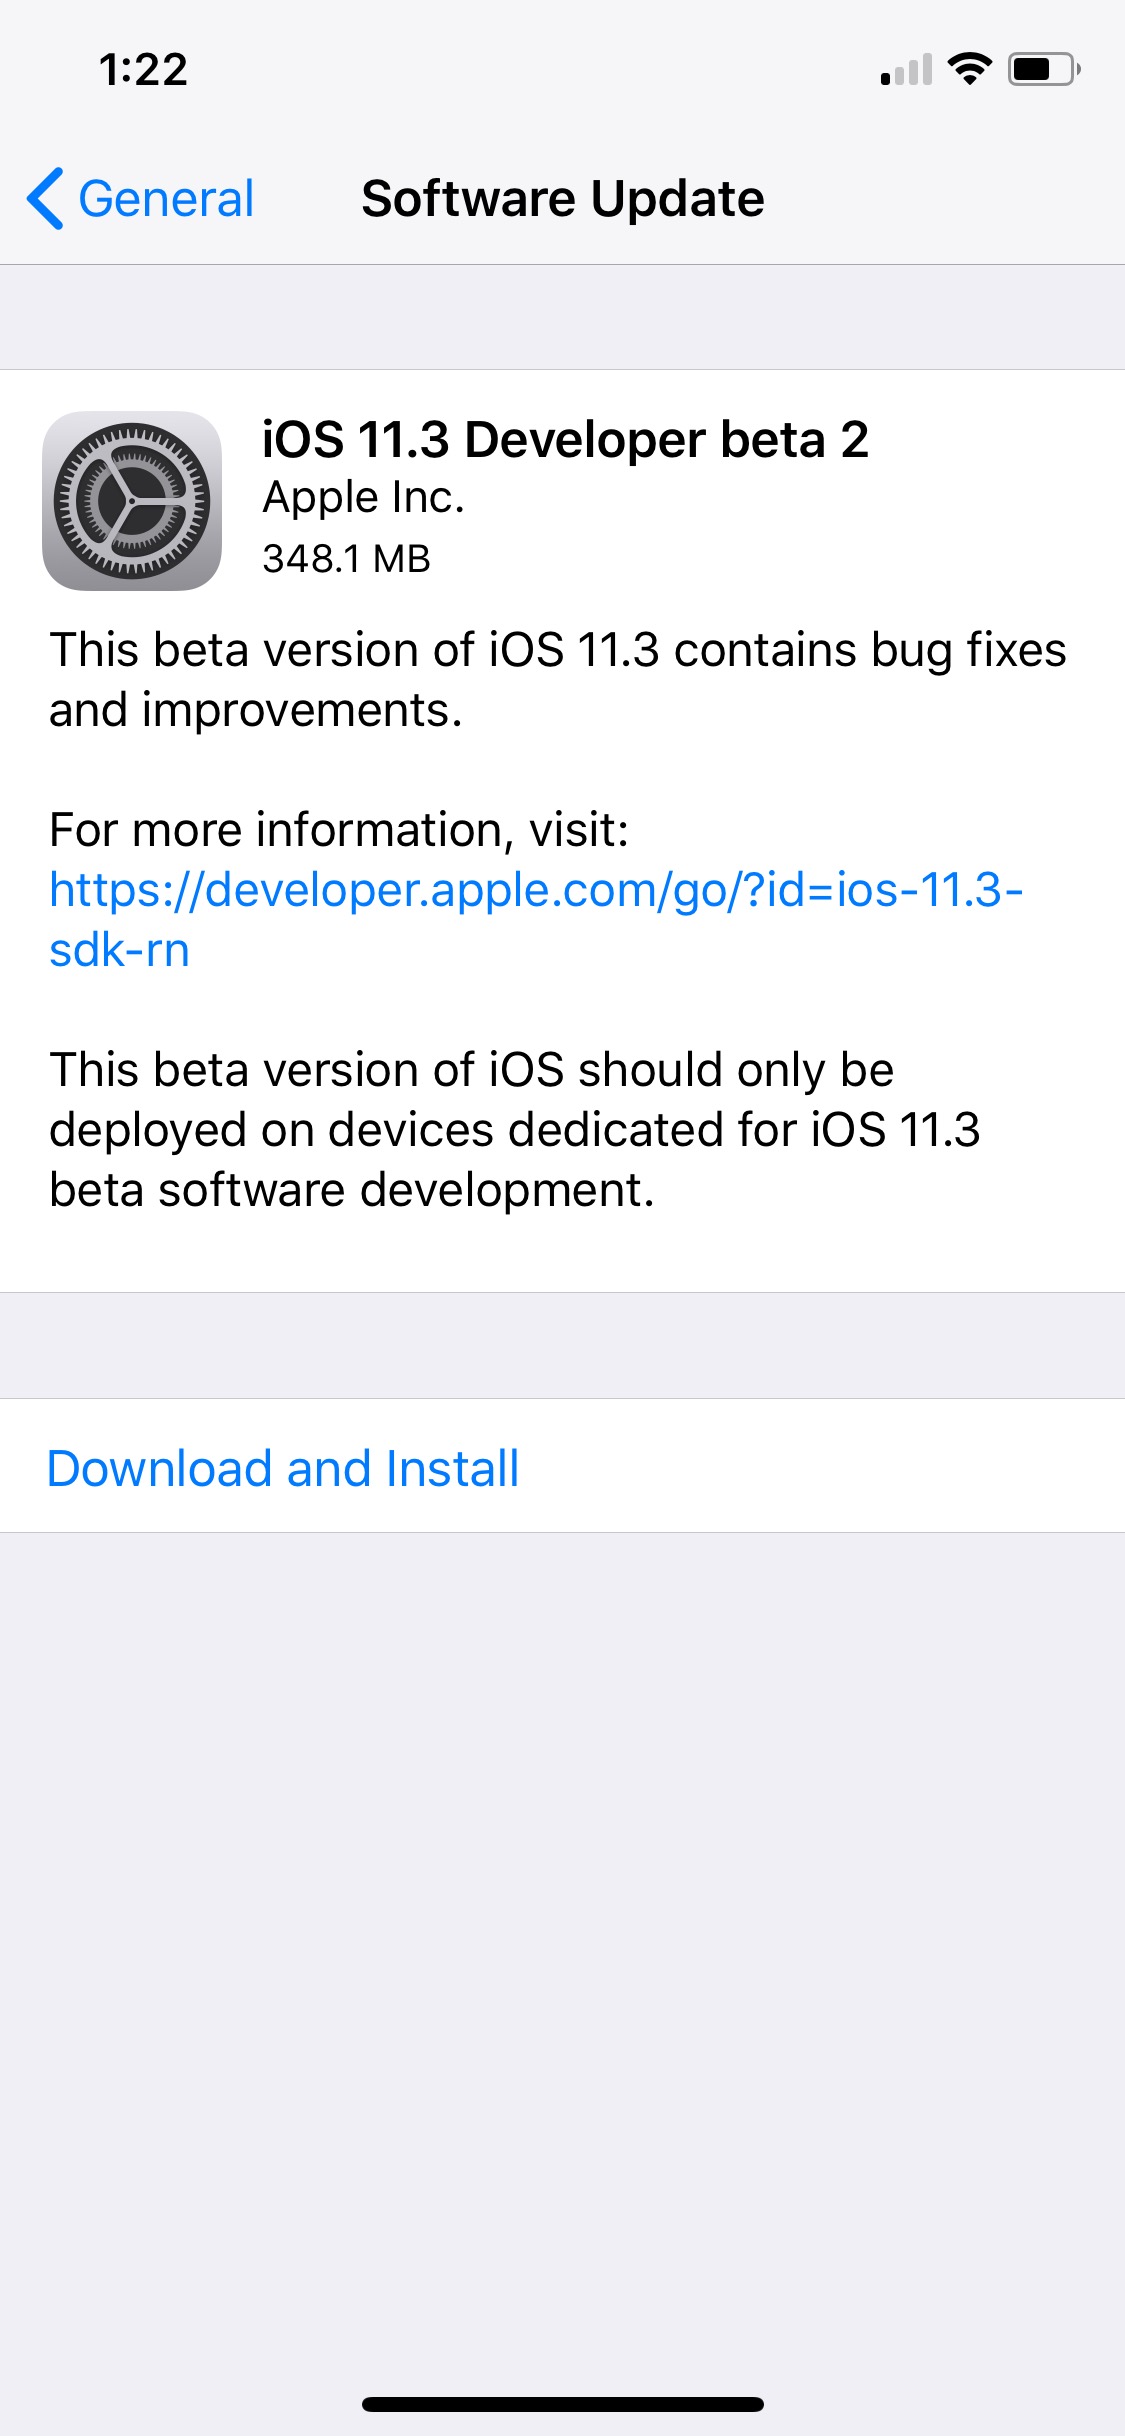 Apple Releases iOS 11.3 Beta 2 to Developers [Download]